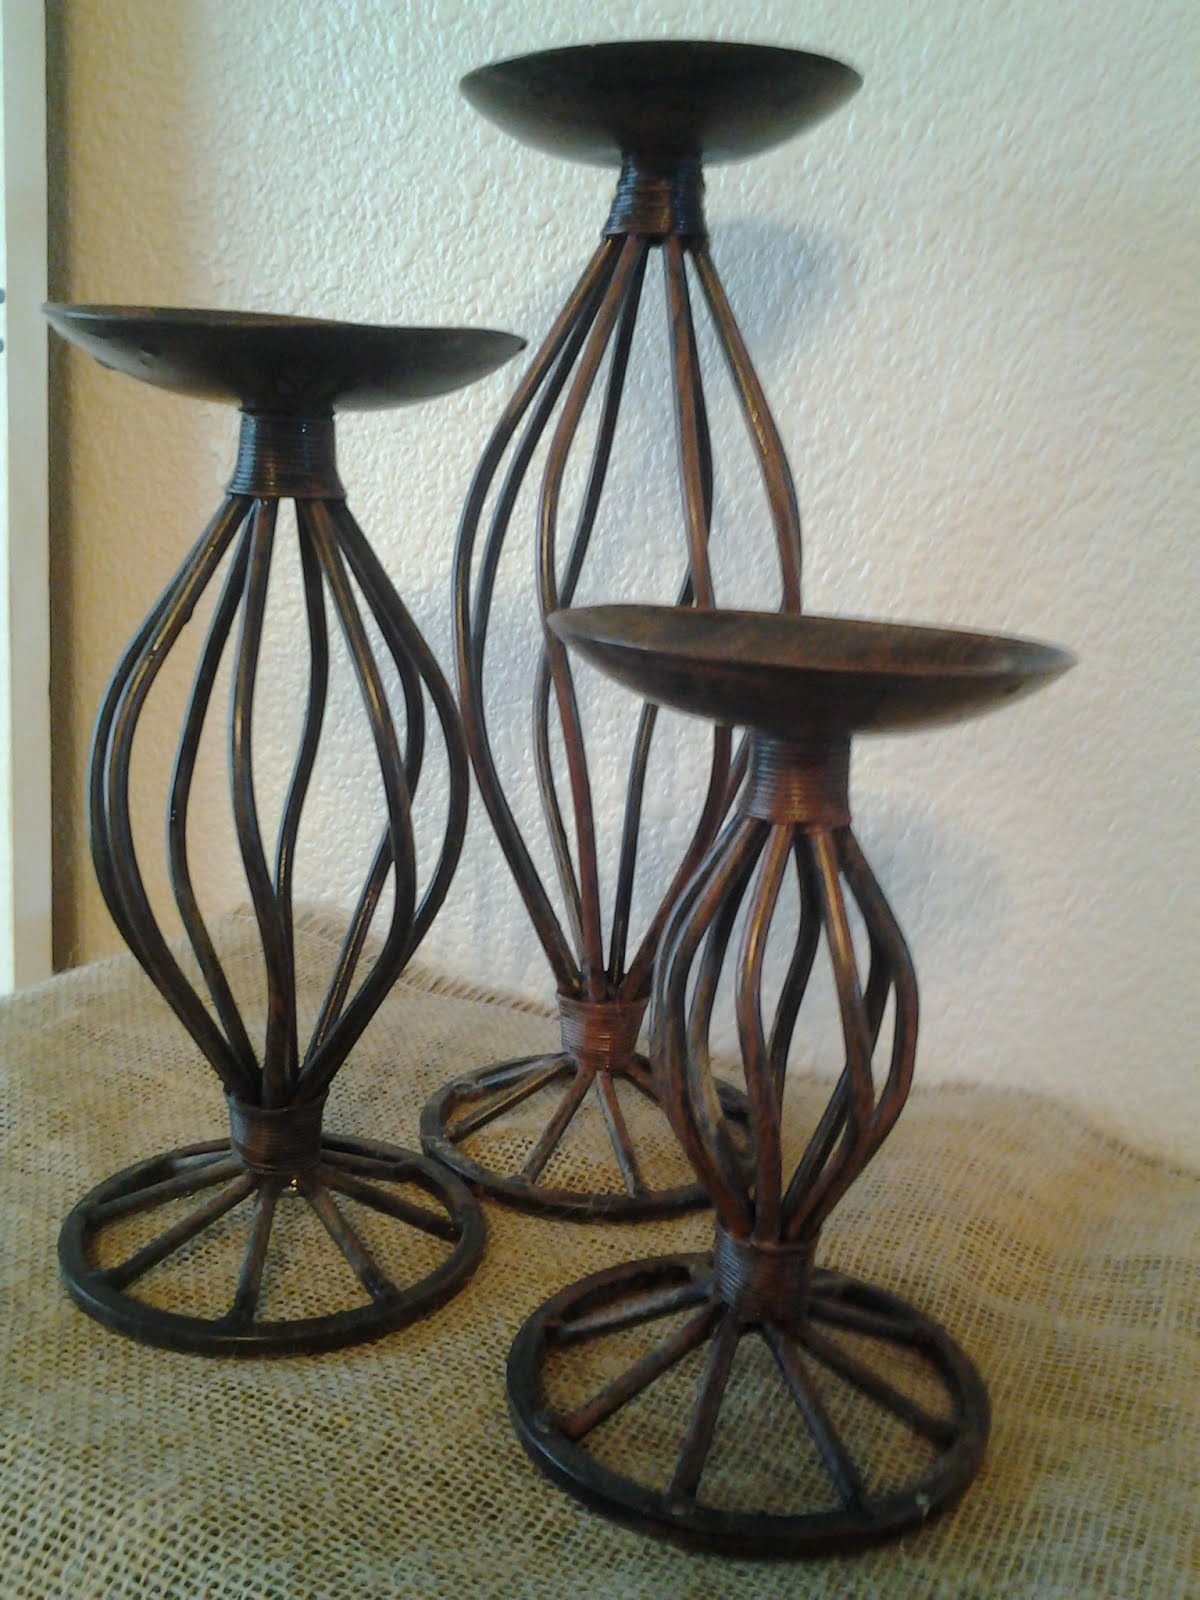 3 candle holders $sold